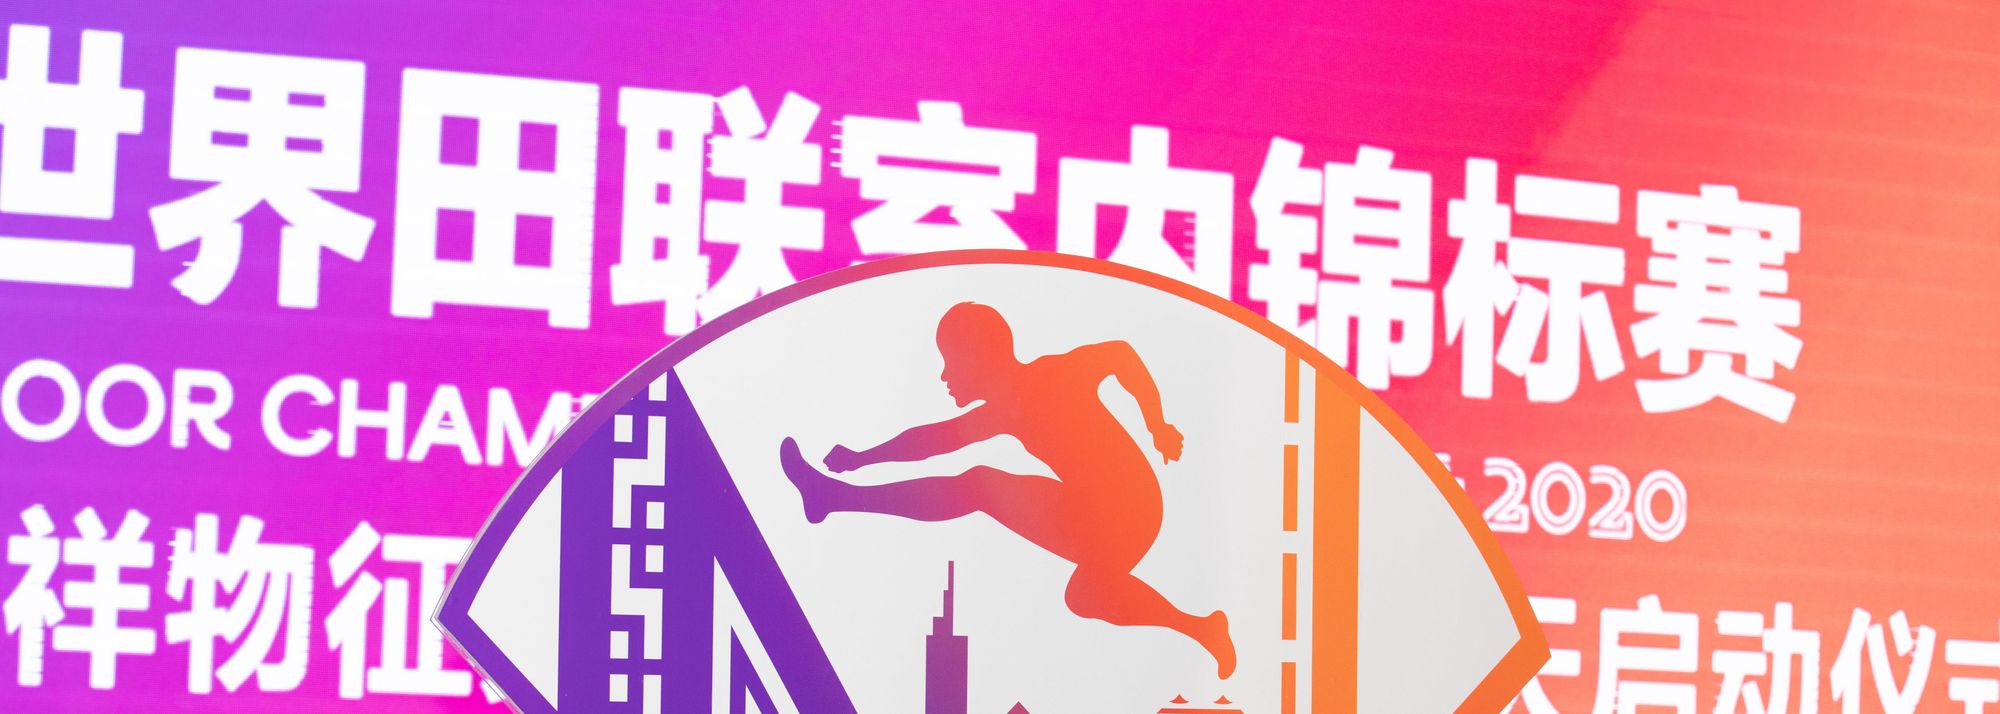 Preparations for the World Athletics Indoor Championships Nanjing 2020 stepped up a notch on Wednesday (4) as the event’s emblem and slogan were unveiled, marking 100 days to go until the sport’s next big global competition.